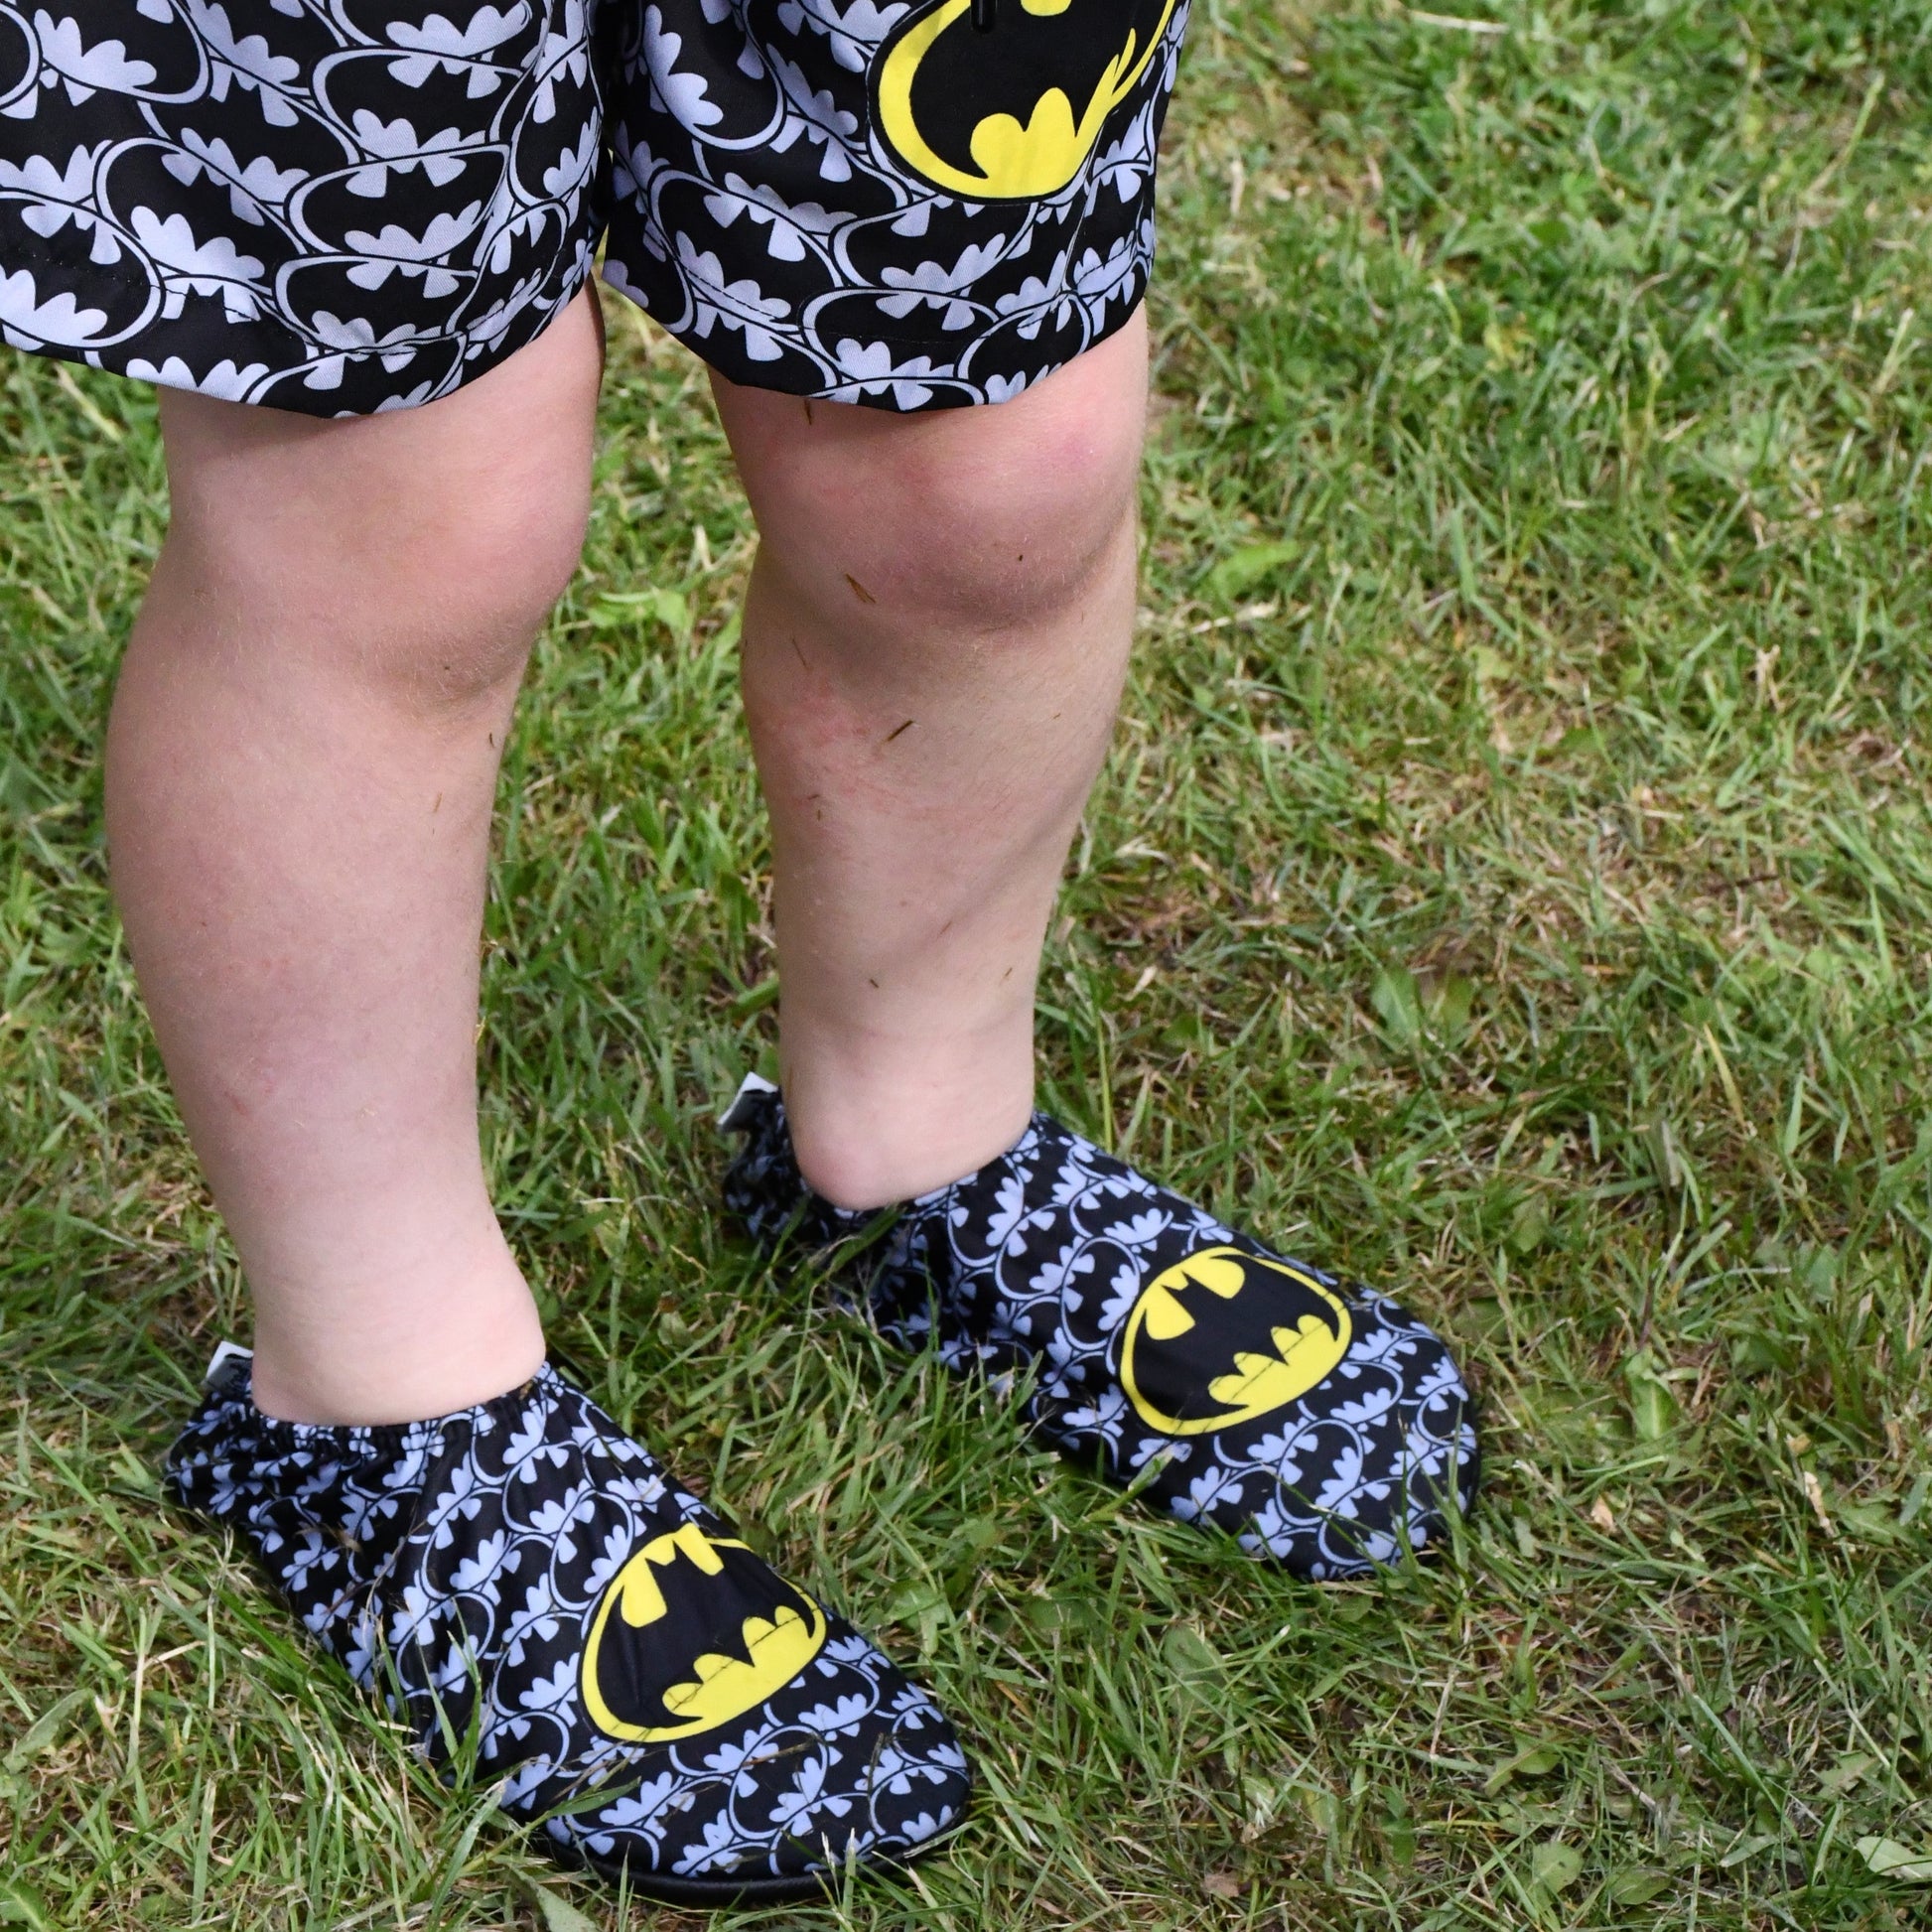 A non-slip shoe by Slipfree in collaboration with Warner Brothers, style Bruce (Batman) in grey black and yellow Batman print.  Lifestyle image.